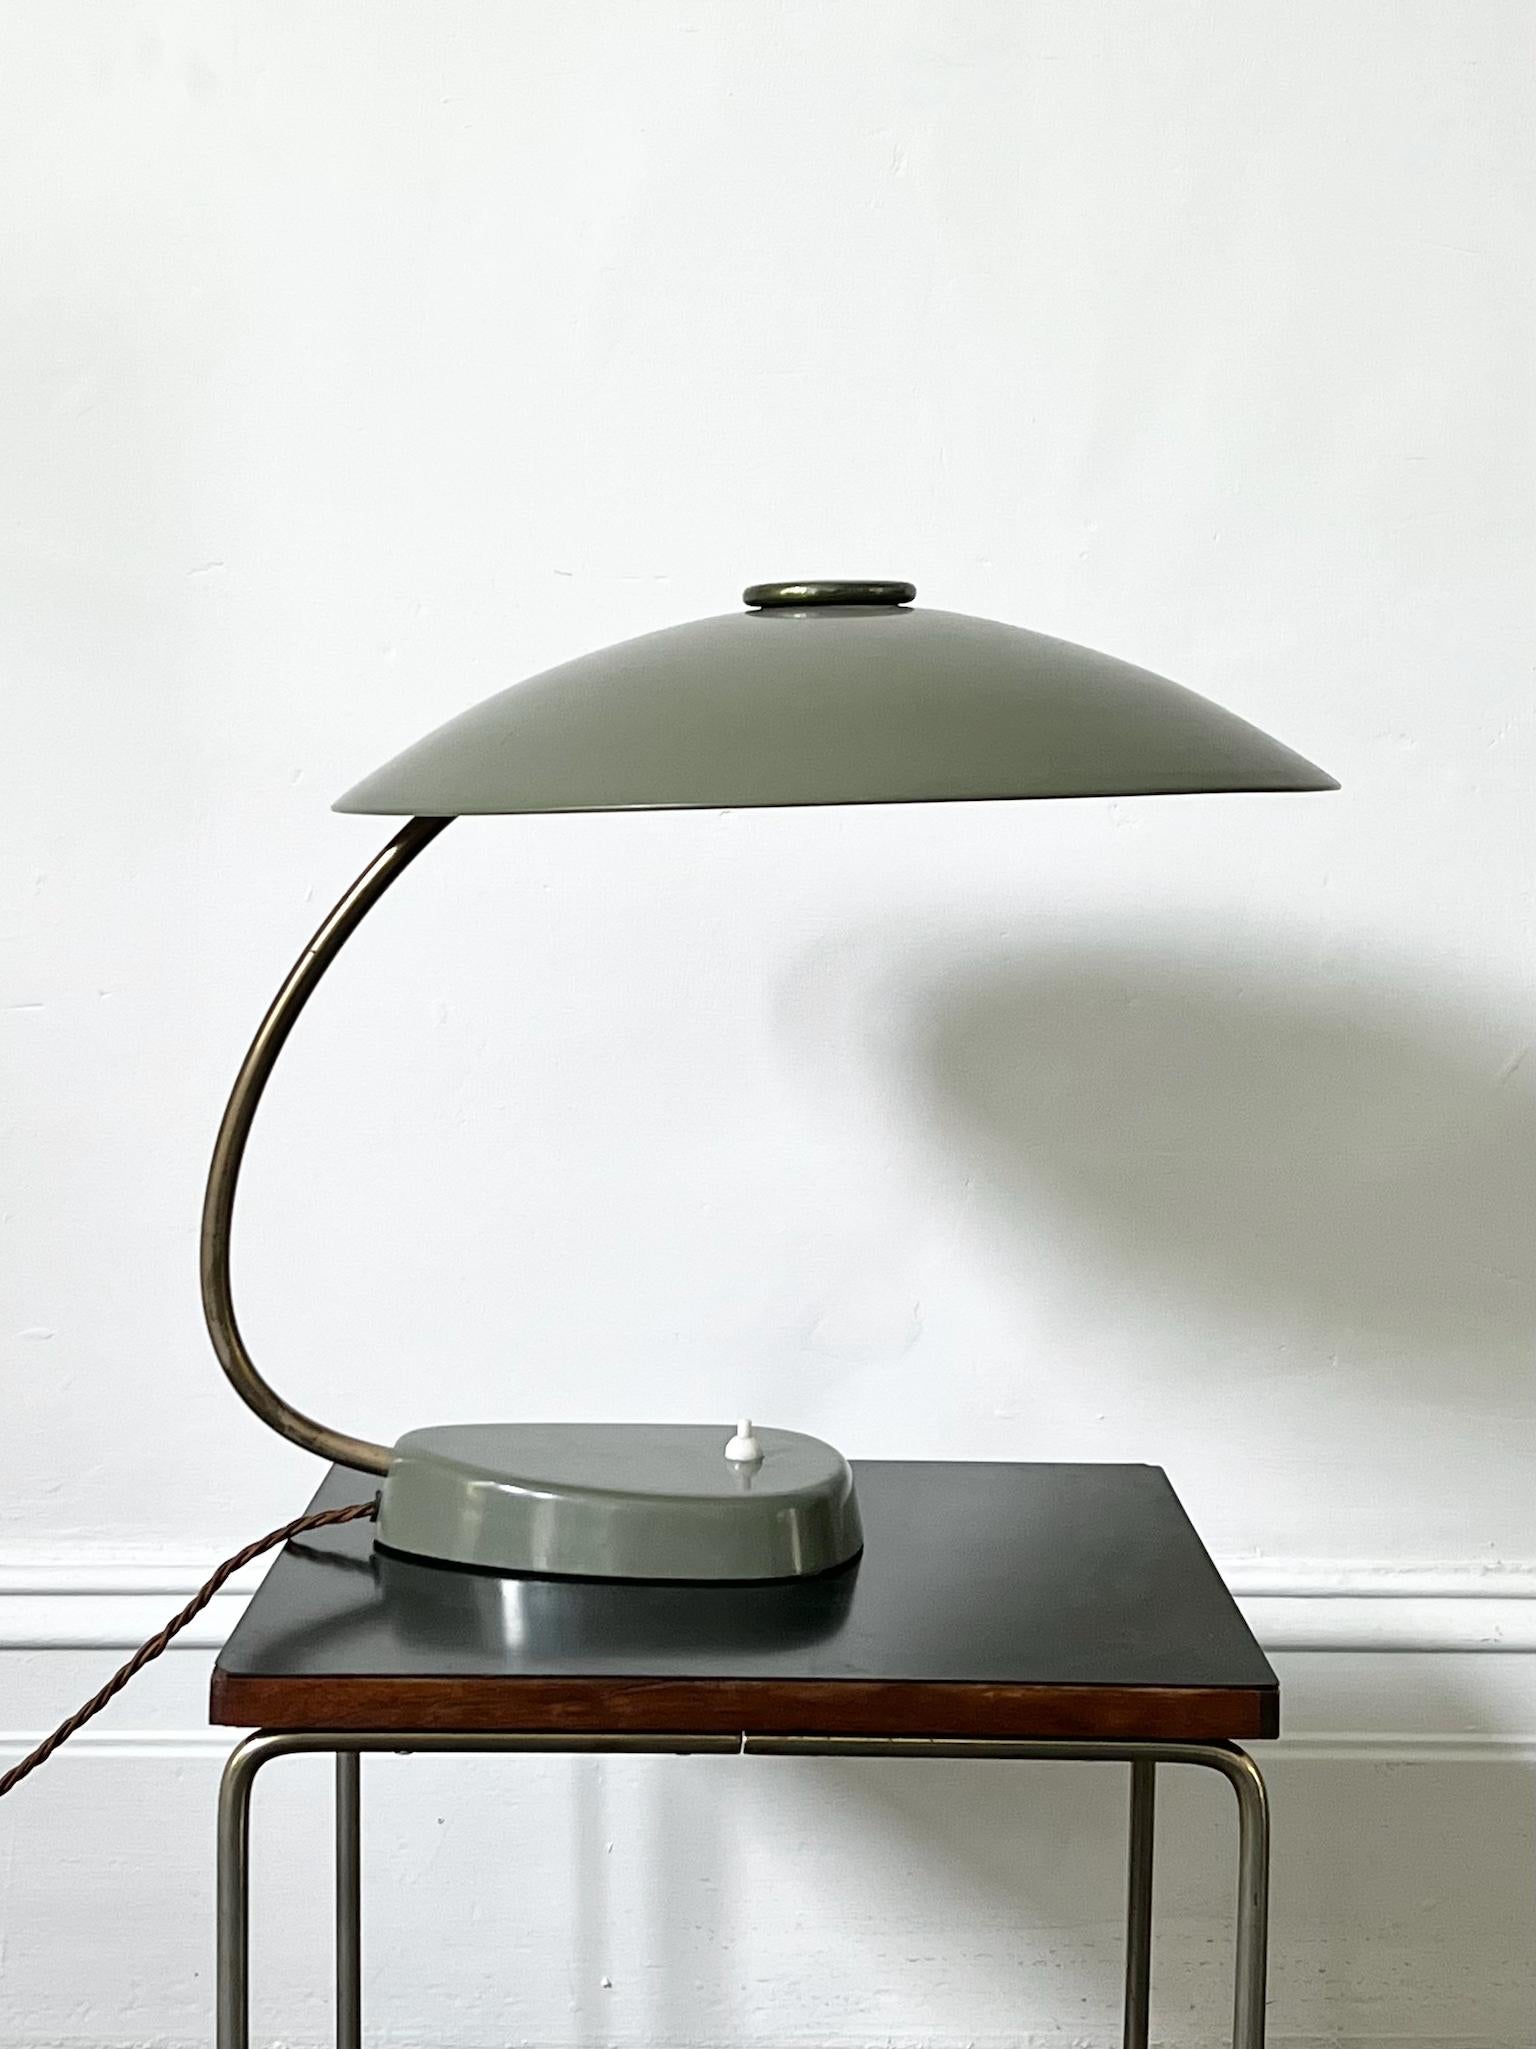 A simple but striking desk lamp with large saucer-shaped shade. Made by LBL dated 1958. 

Unusual to see a lamp of this style in such a large size (approximately 43cm), the shade is French grey (green-grey) on the outside, and white inside, and the